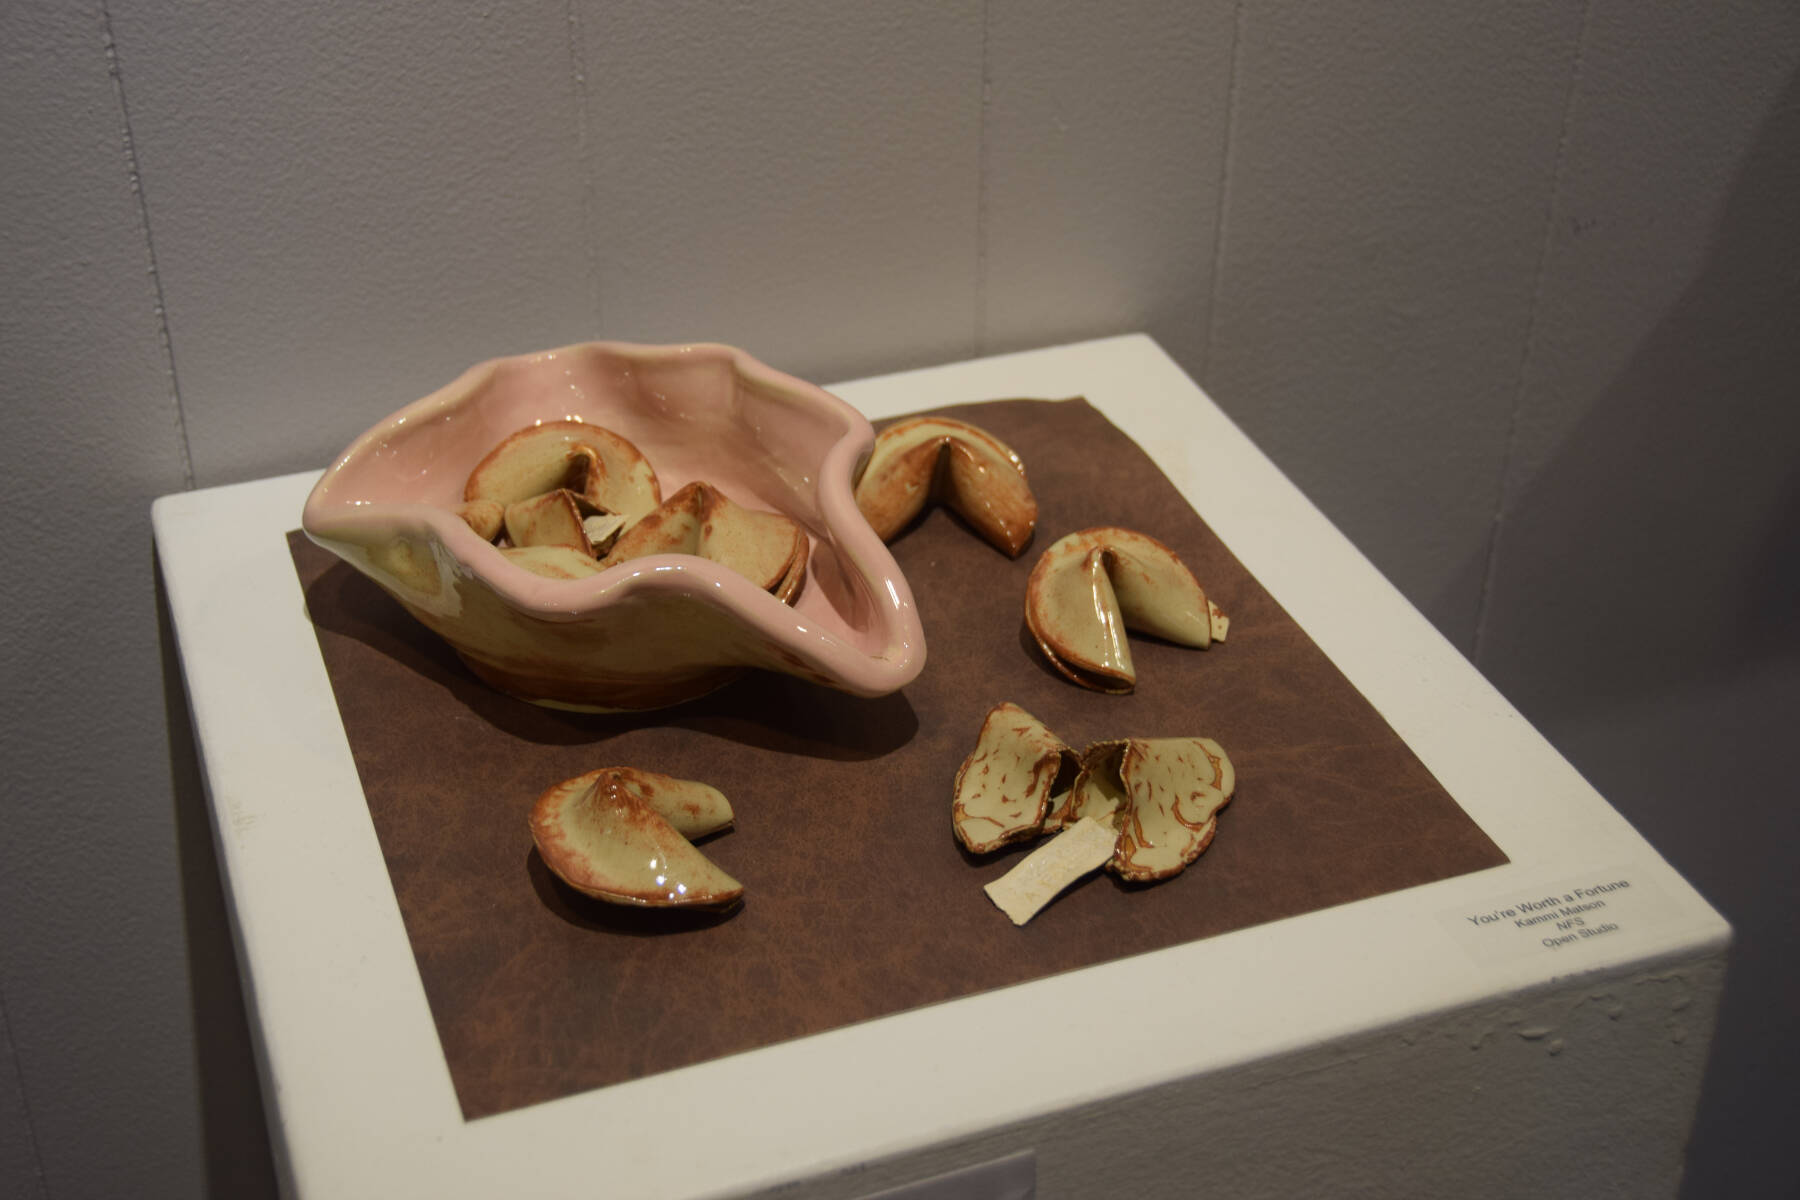 Kammi Matson’s handbuilt ceramics piece, “You’re Worth a Fortune,” is on display at Homer Council on the Arts’ First Friday showcase on Sept. 1 in Homer, Alaska. (Delcenia Cosman/Homer News)